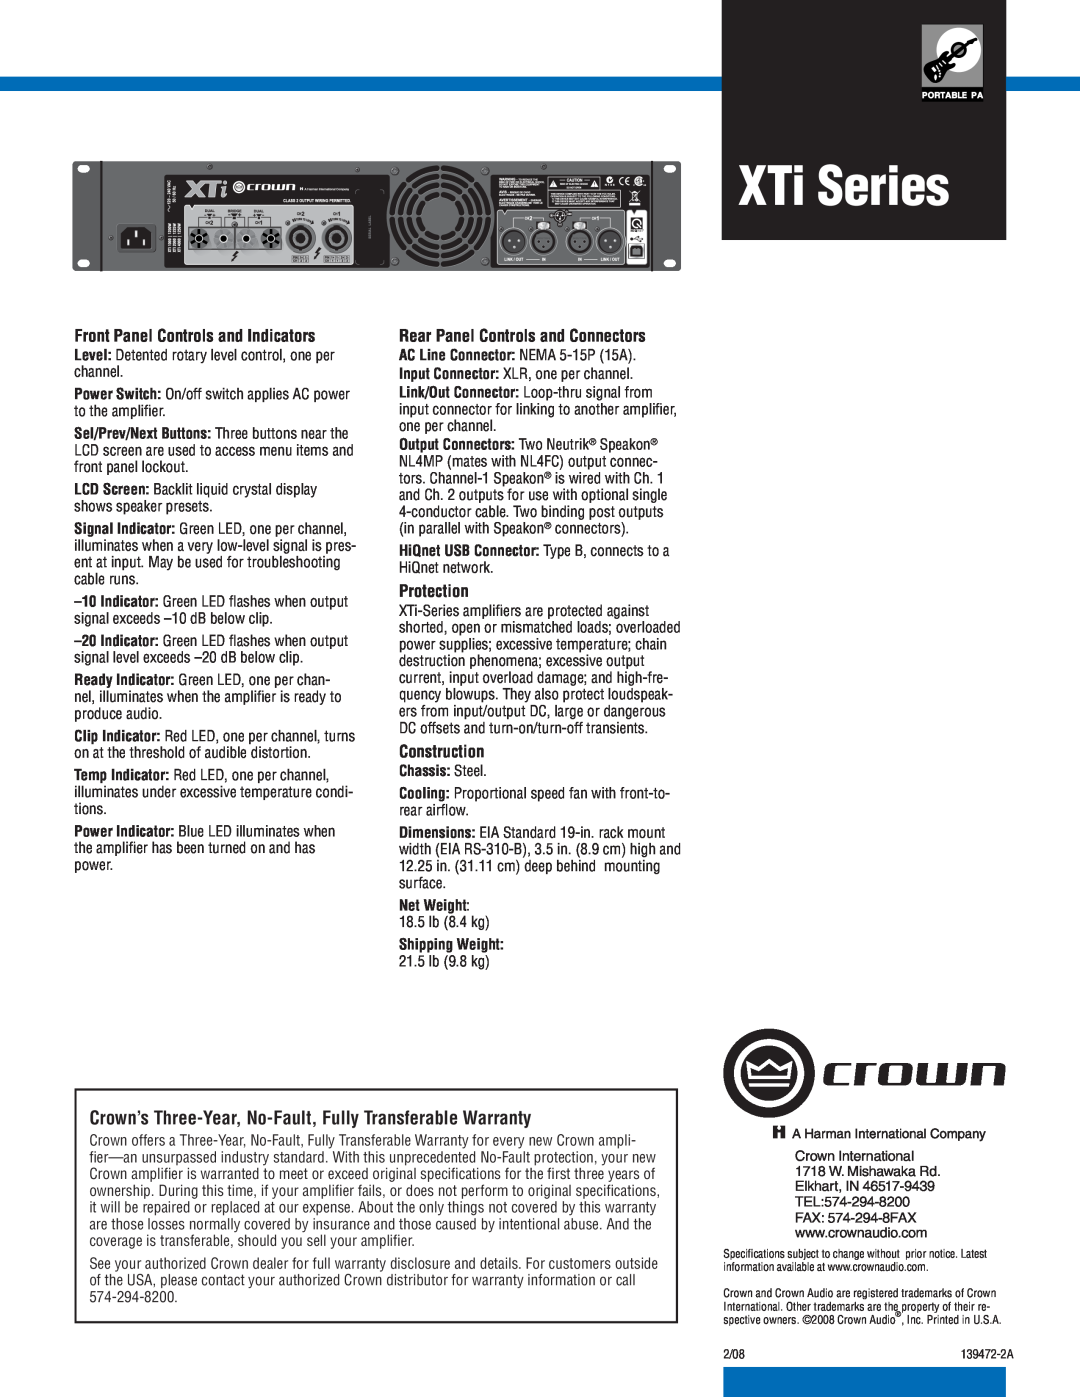 Crown Audio XTi 2000 Front Panel Controls and Indicators, Rear Panel Controls and Connectors, Protection, Construction 